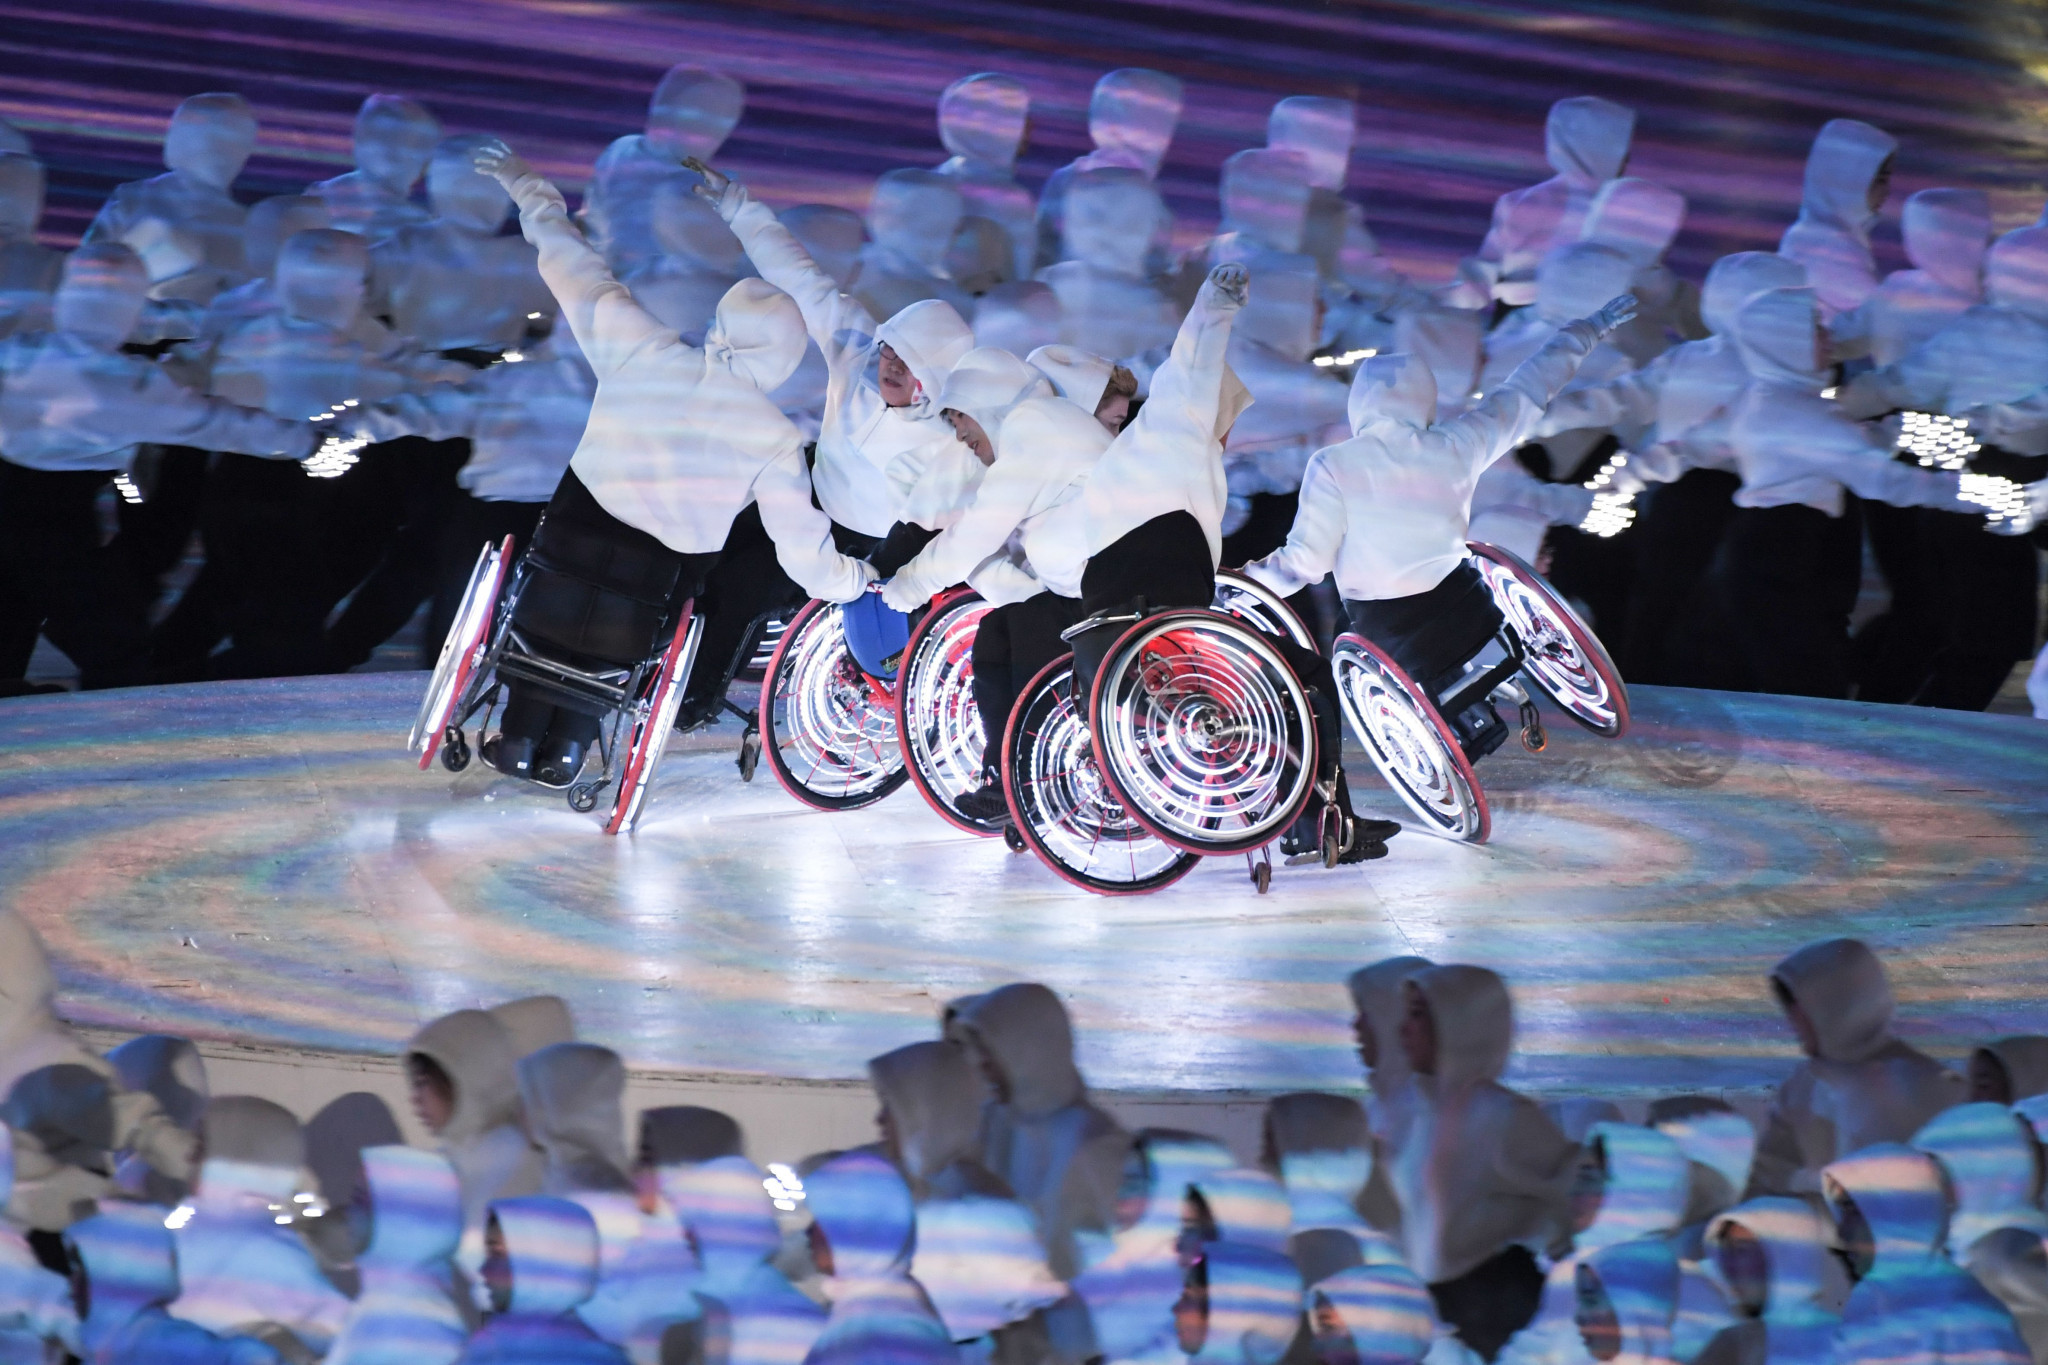 A dazzling dance display by people in wheelchairs was one of the highlights of the evening ©Getty Images